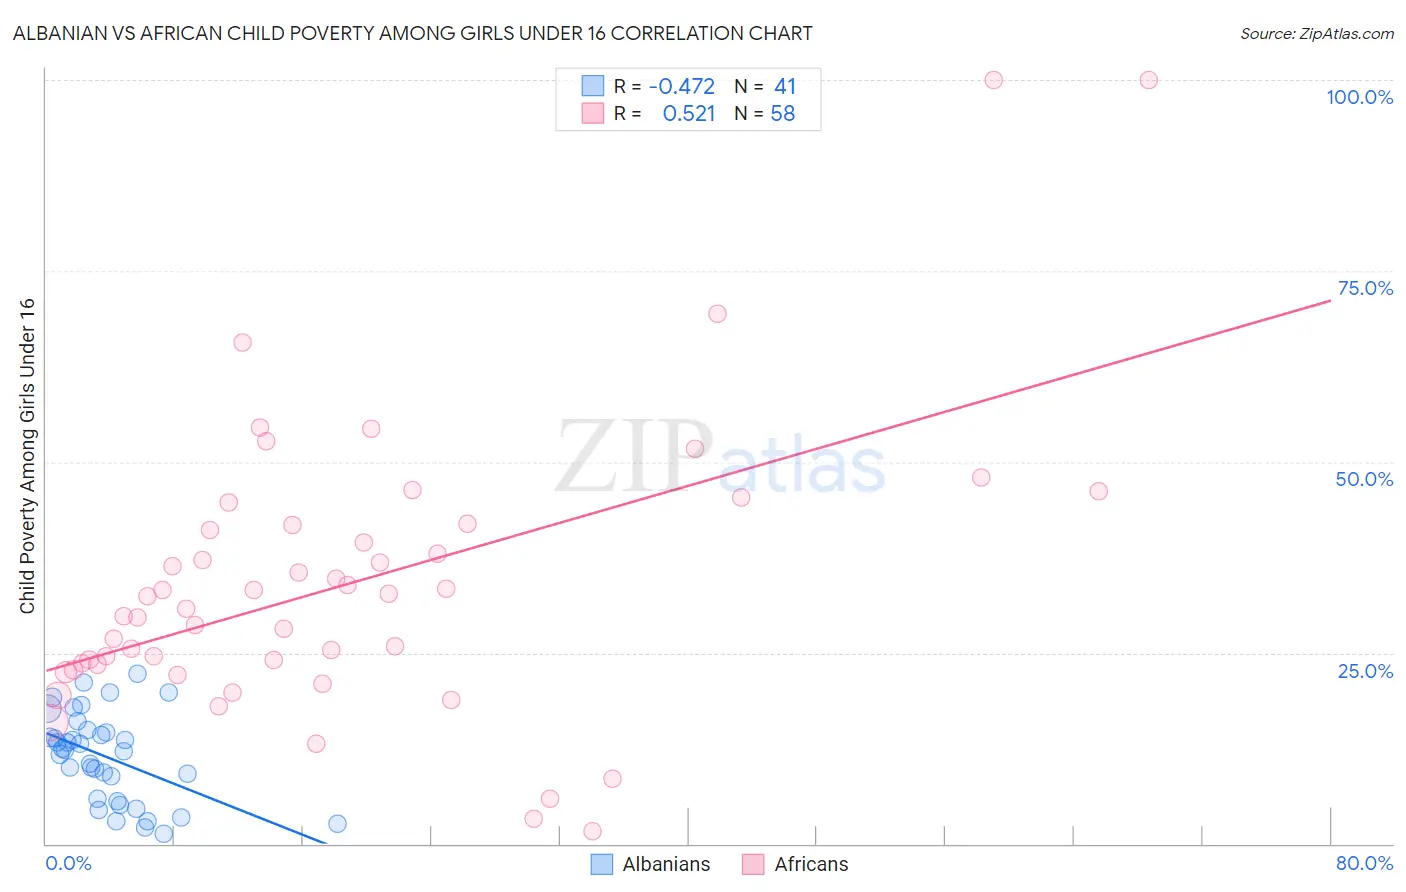 Albanian vs African Child Poverty Among Girls Under 16